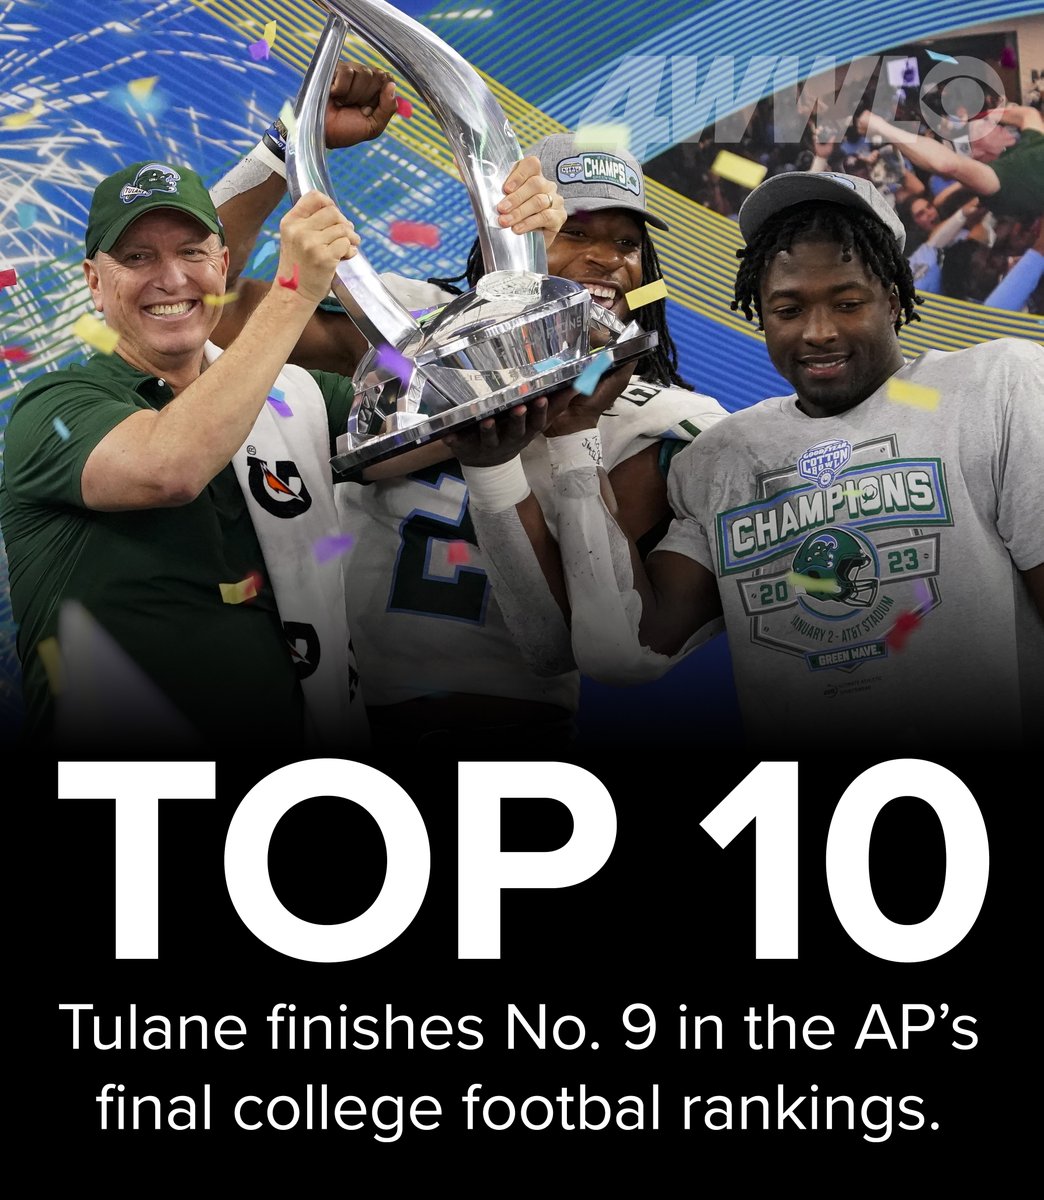 RT @WWLTV: Tulane finishes the season No. 9 in the AP College Football Rankings! #RollWave https://t.co/th4UQ4NnXP